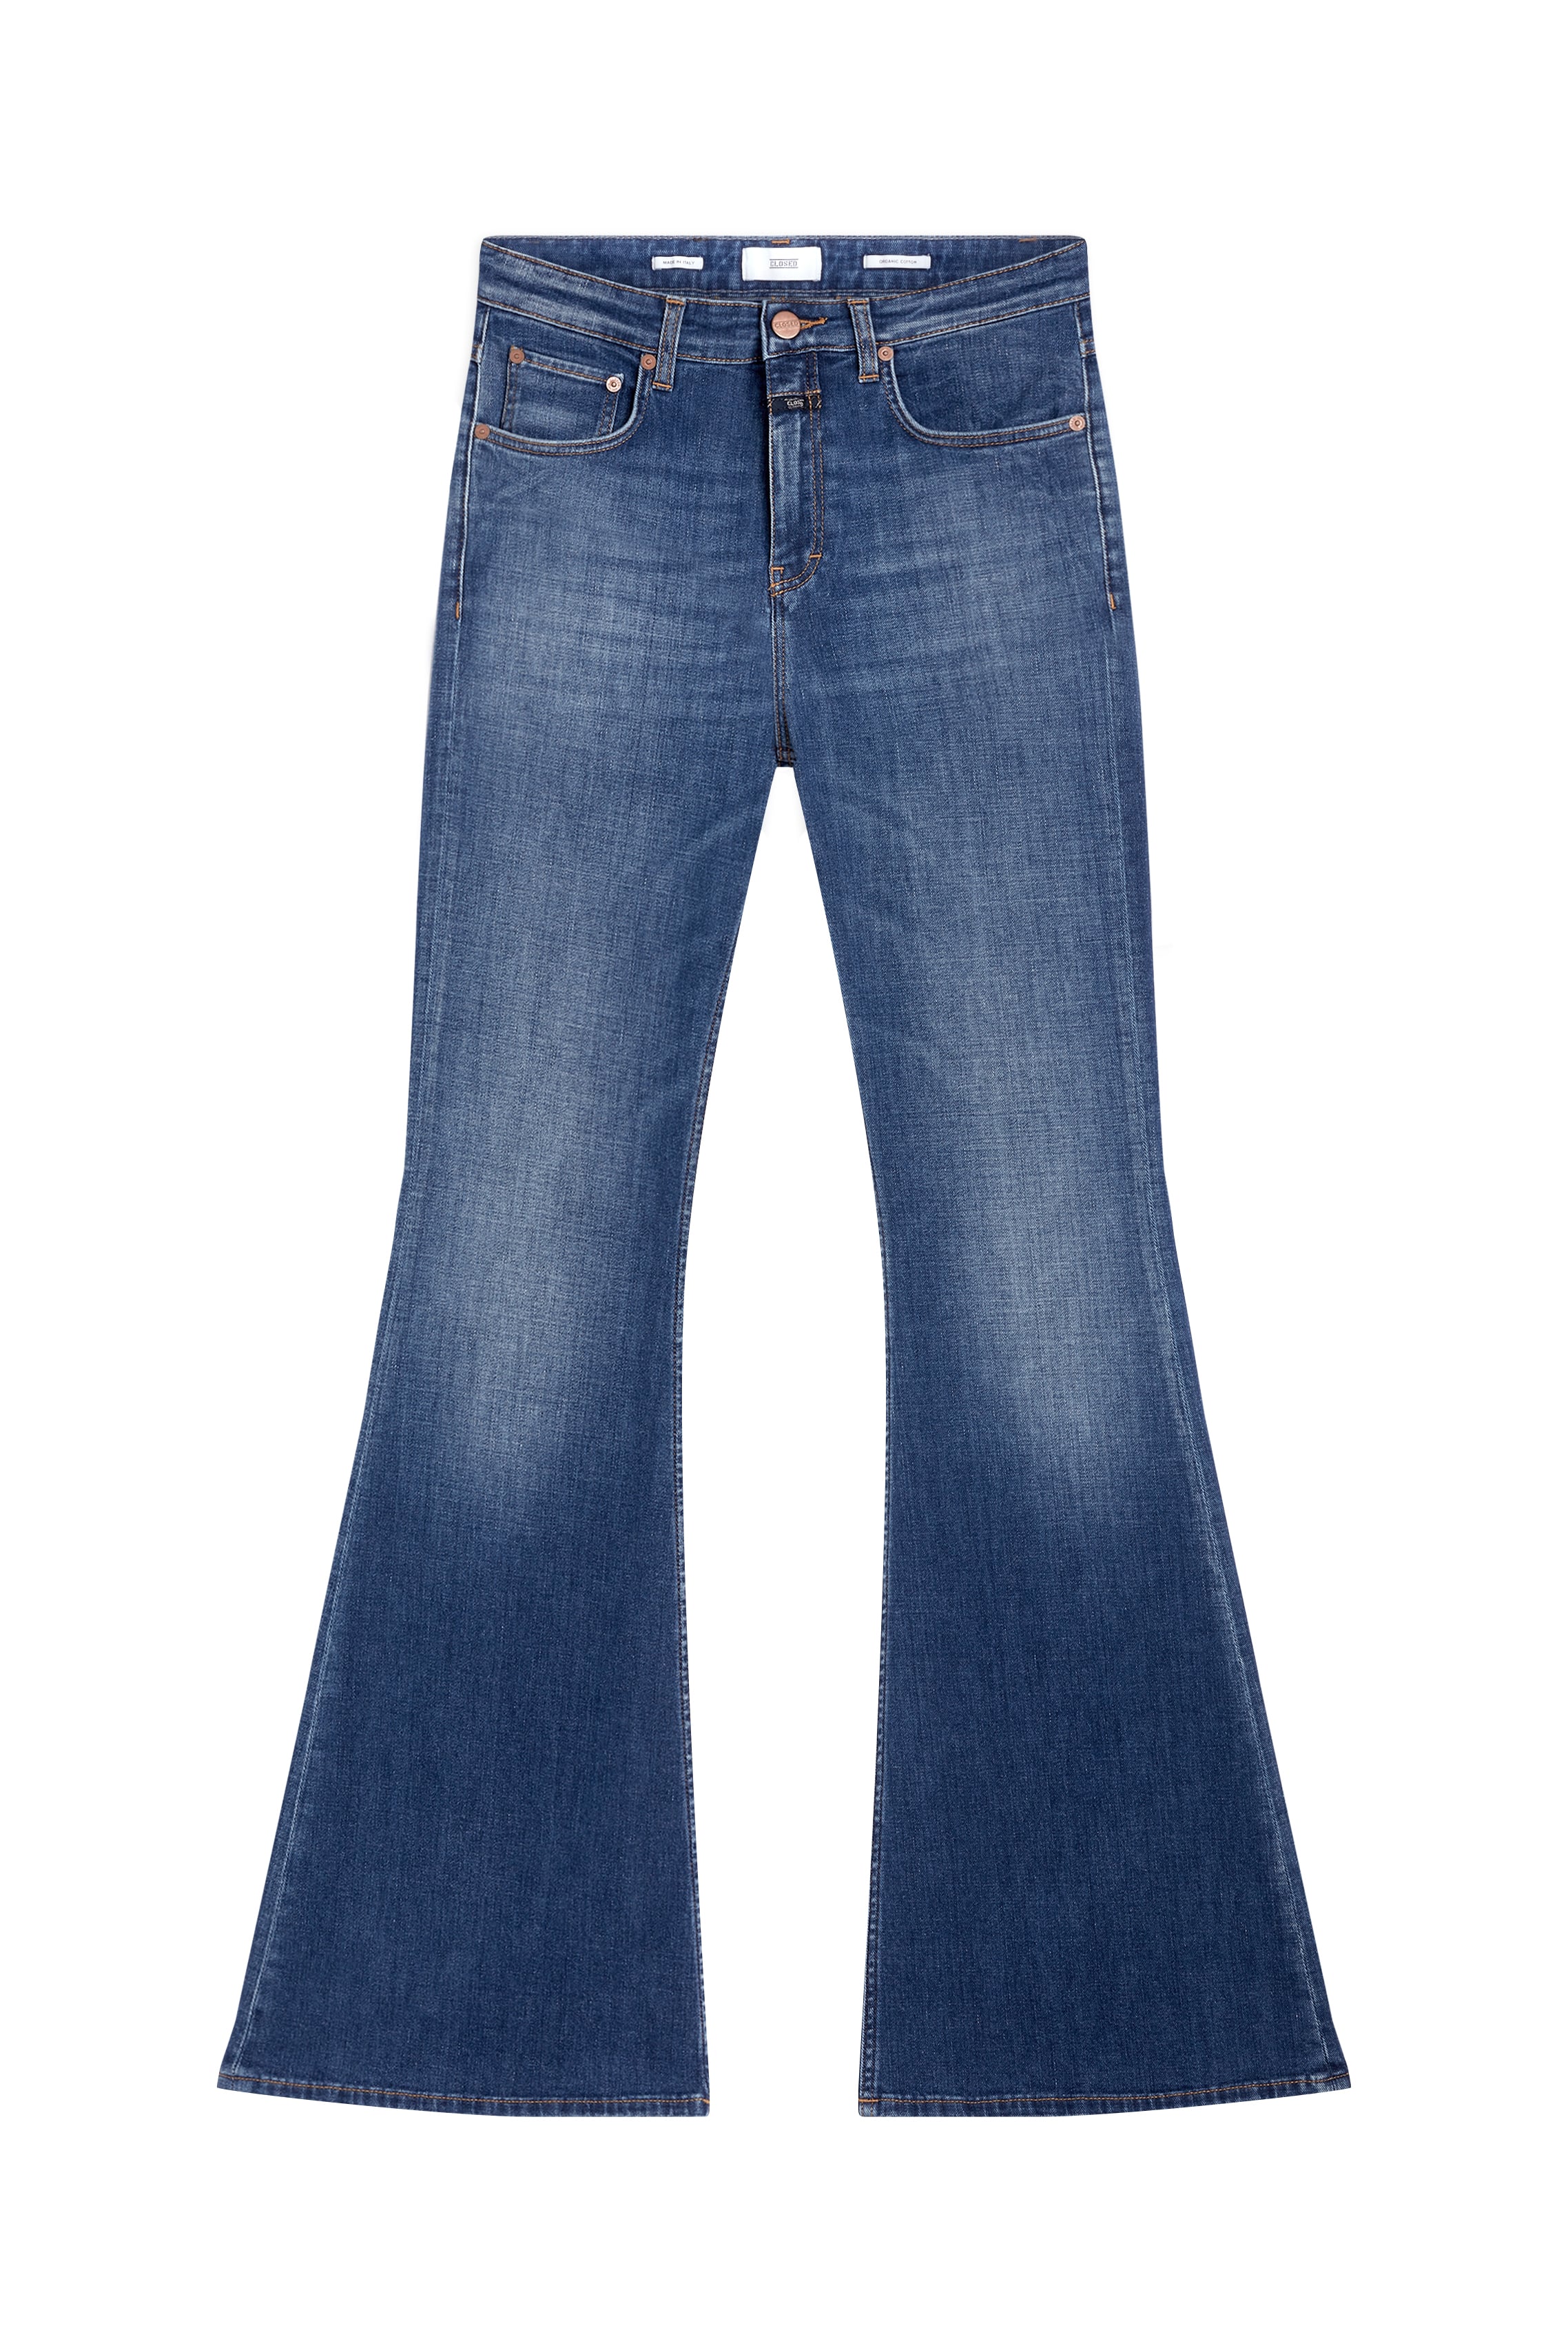 CLOSED-Jeans Flare Blu-TRYME Shop